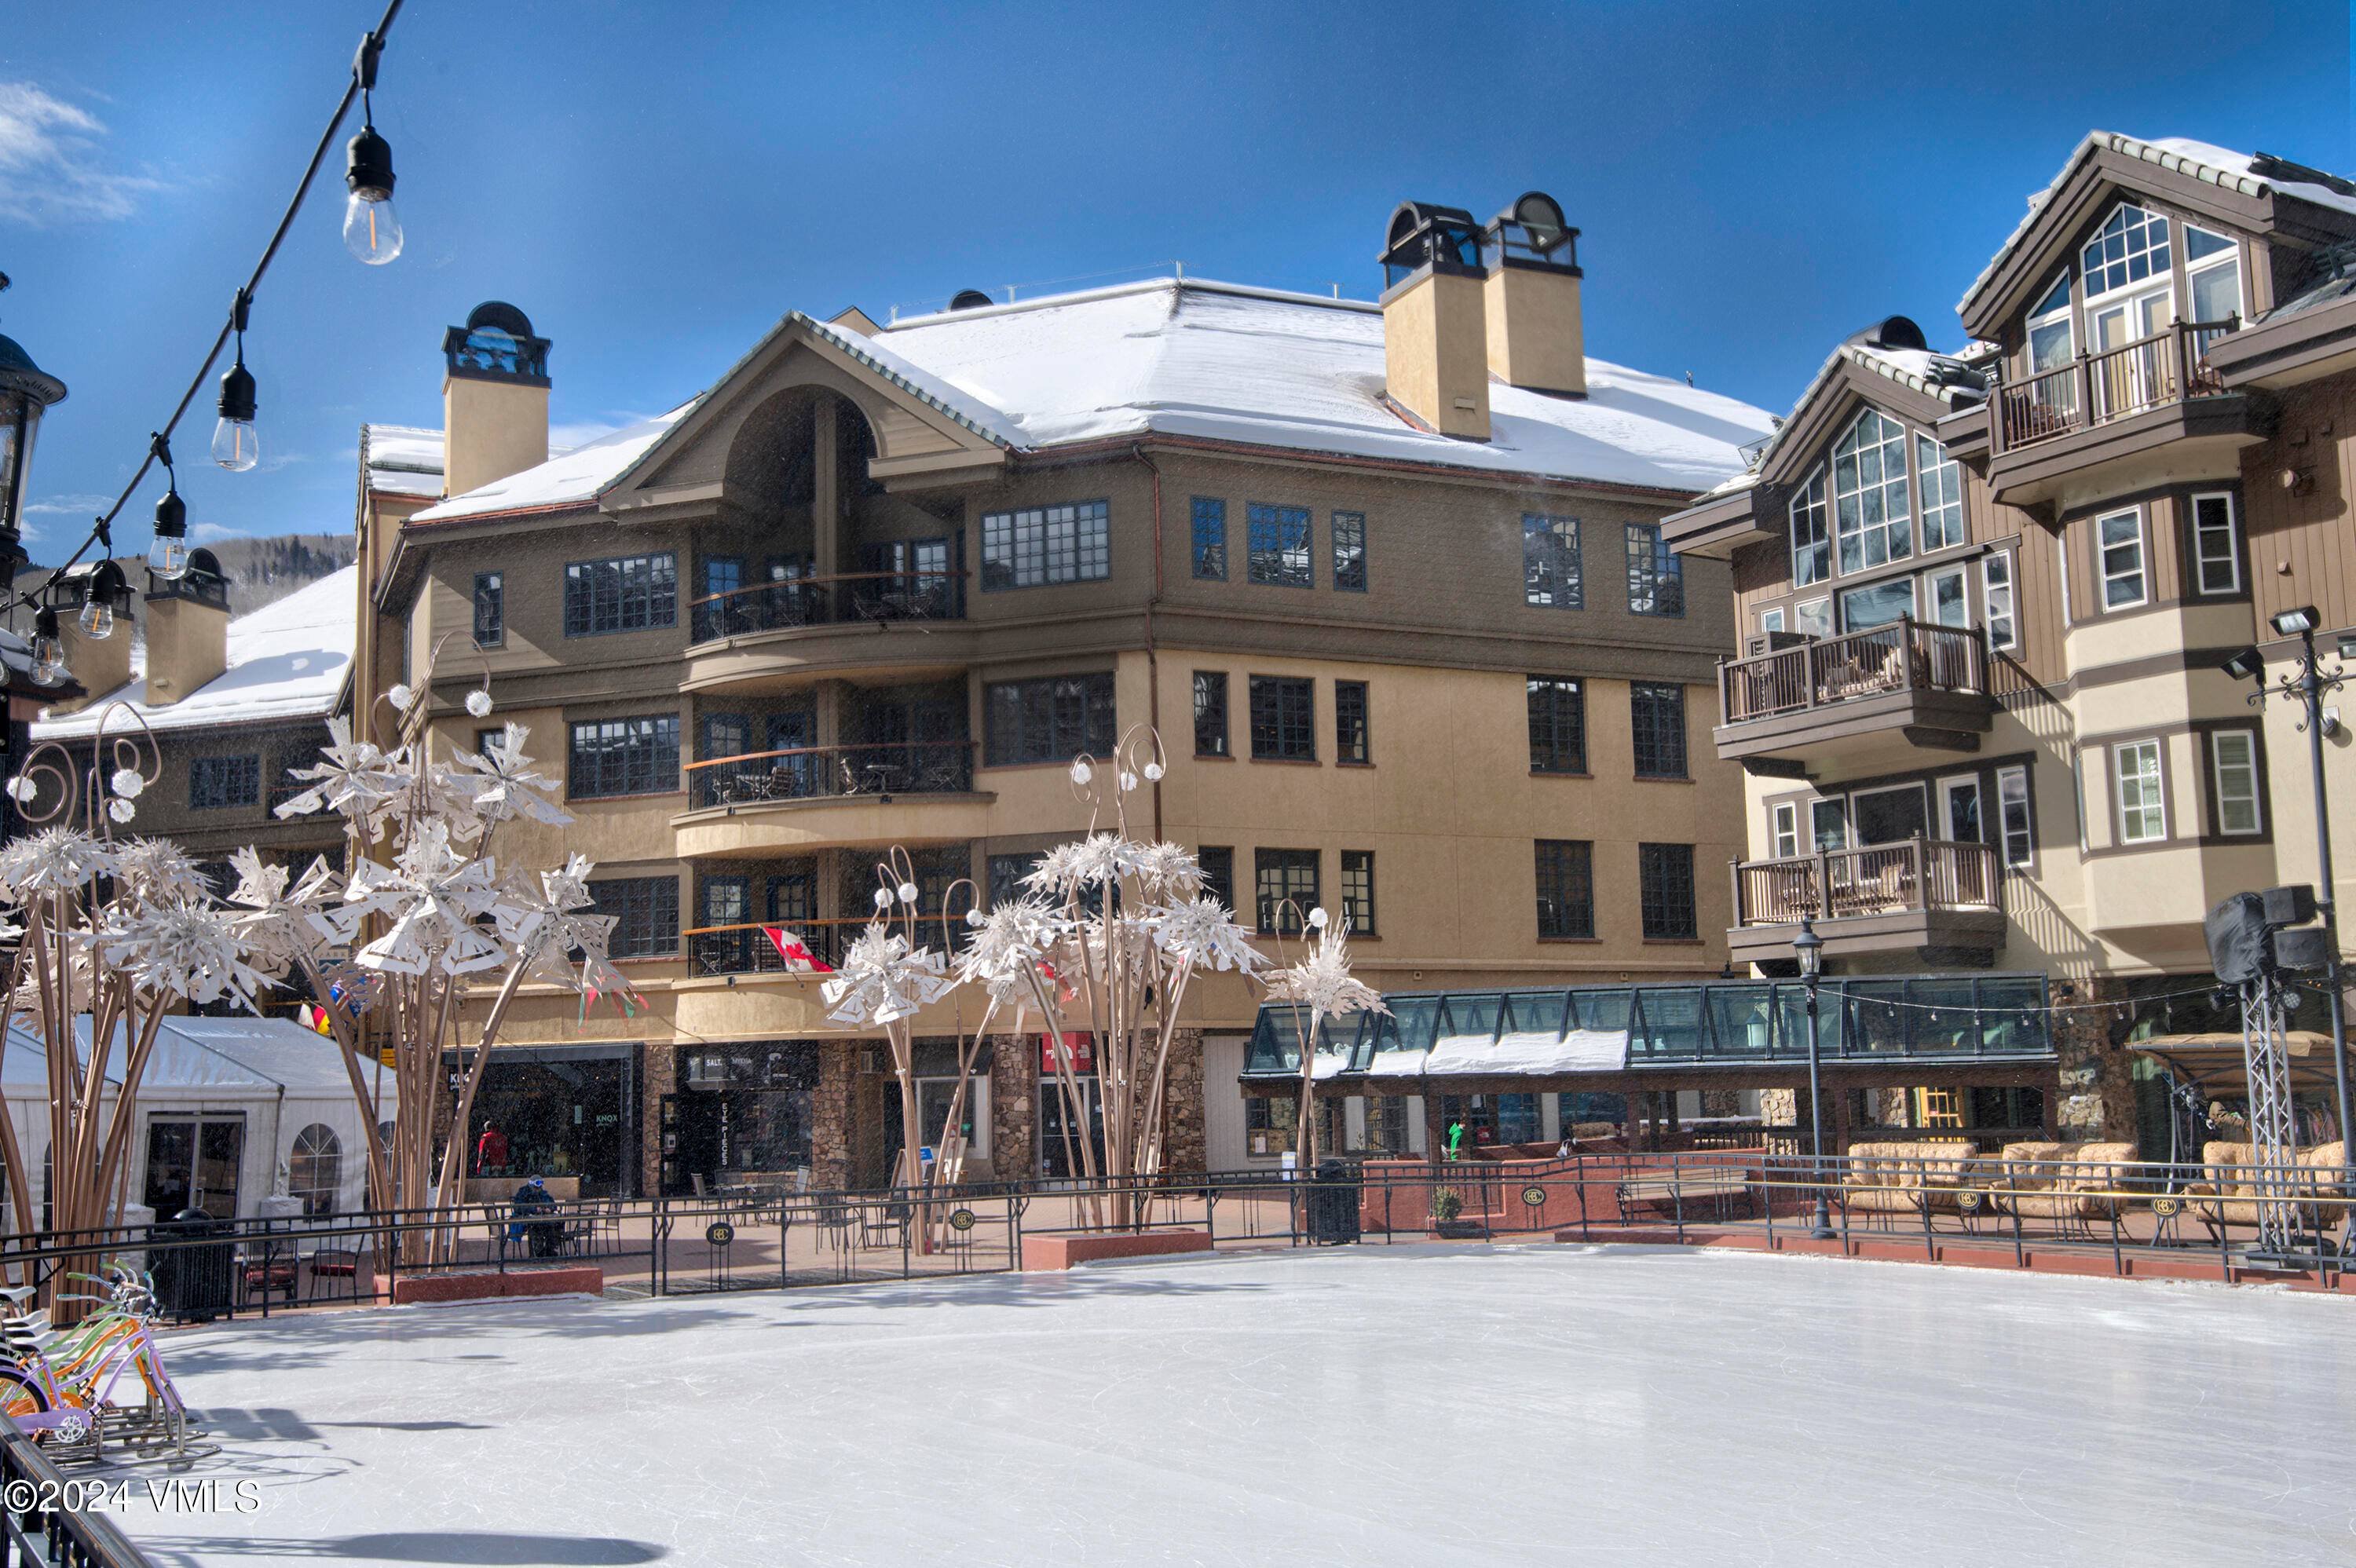 Park Plaza is located in the heart of Beaver Creek Village, nestled among all of your favorite restaurants and shops.